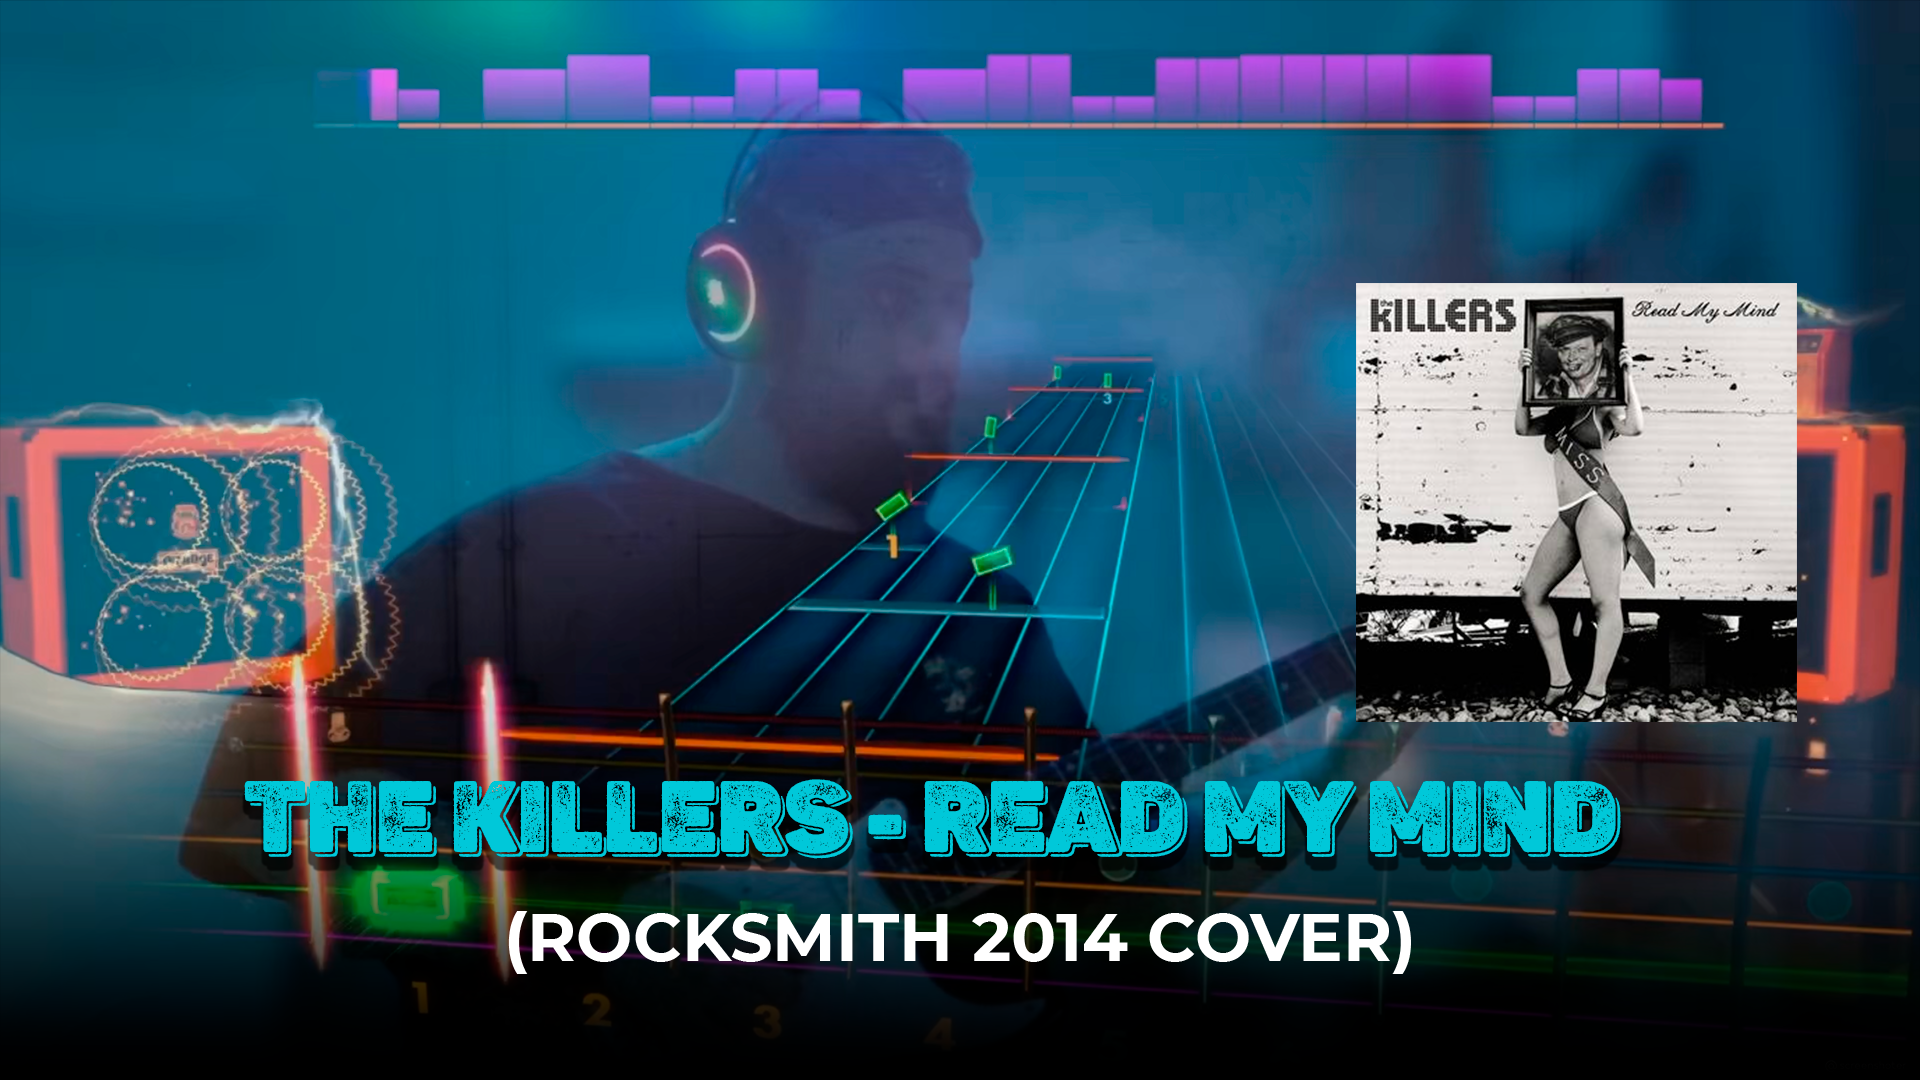 THE KILLERS - READ MY MIND (ROCKSMITH 2014 COVER)